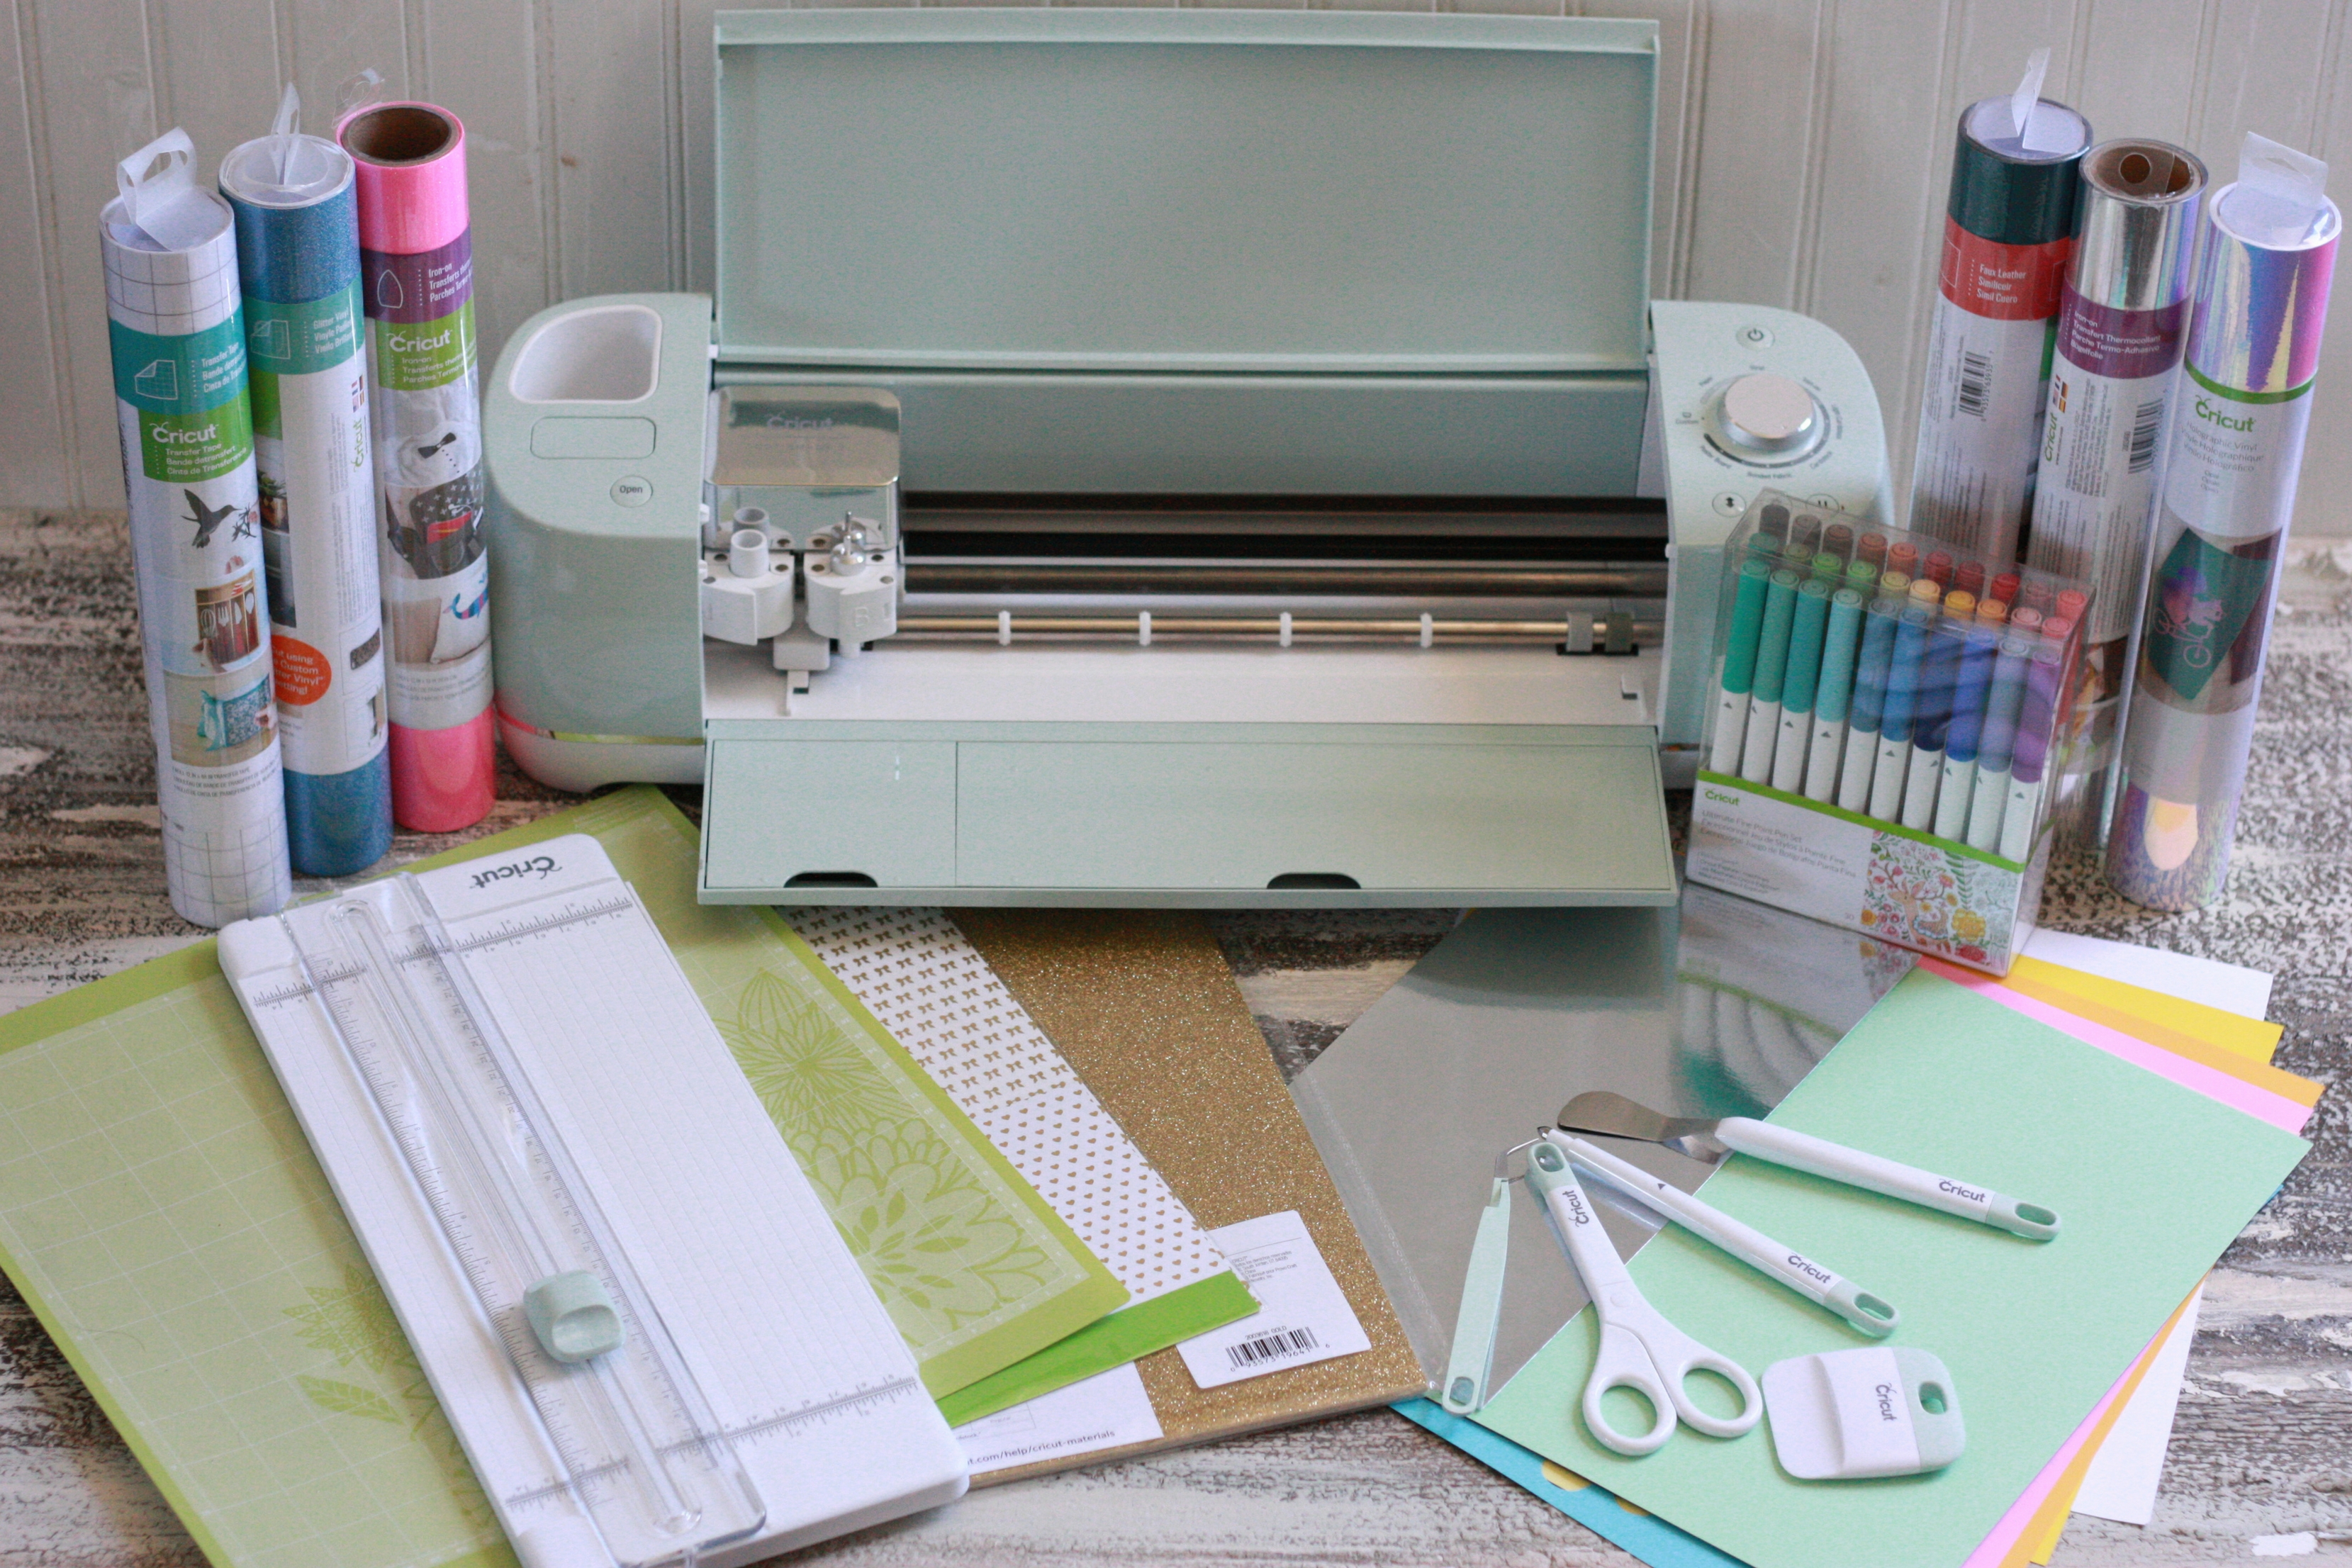 HOW IS THE CRICUT EXPLORE AIR 2 DIFFERENT FROM OTHER CUTTING